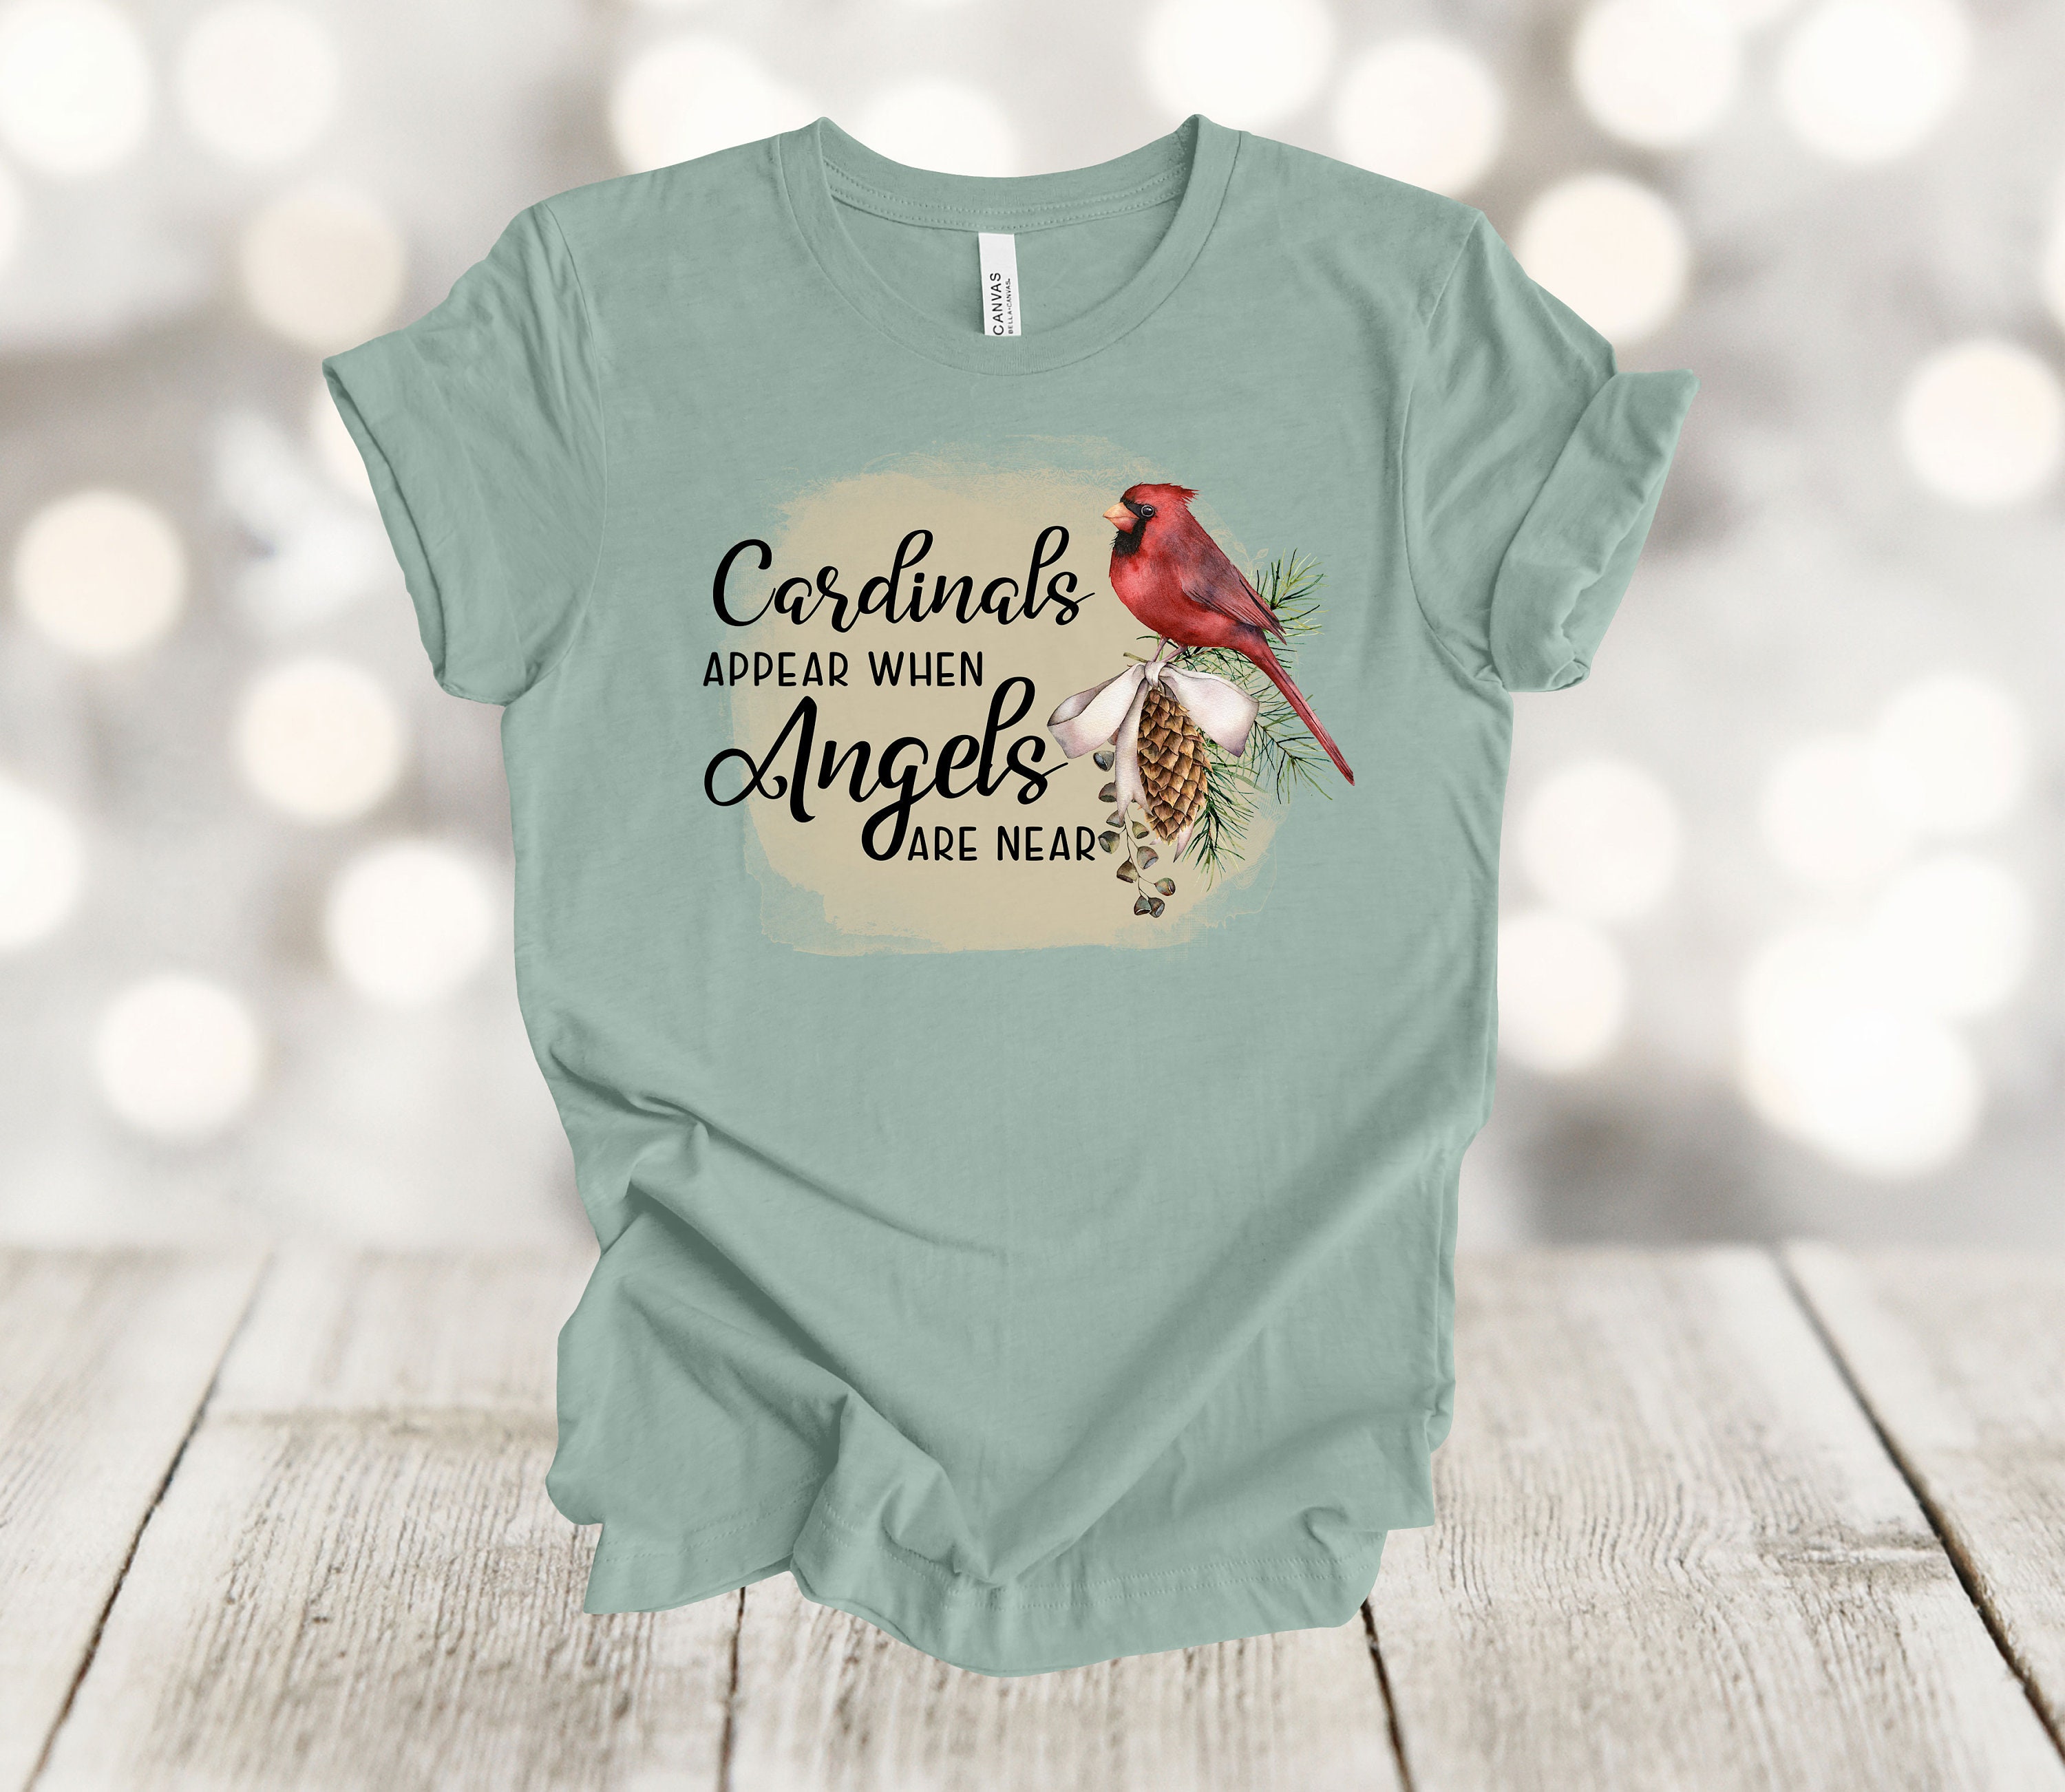 Life is Better With Cardinals - Bird Quote for Good Luck T-Shirt